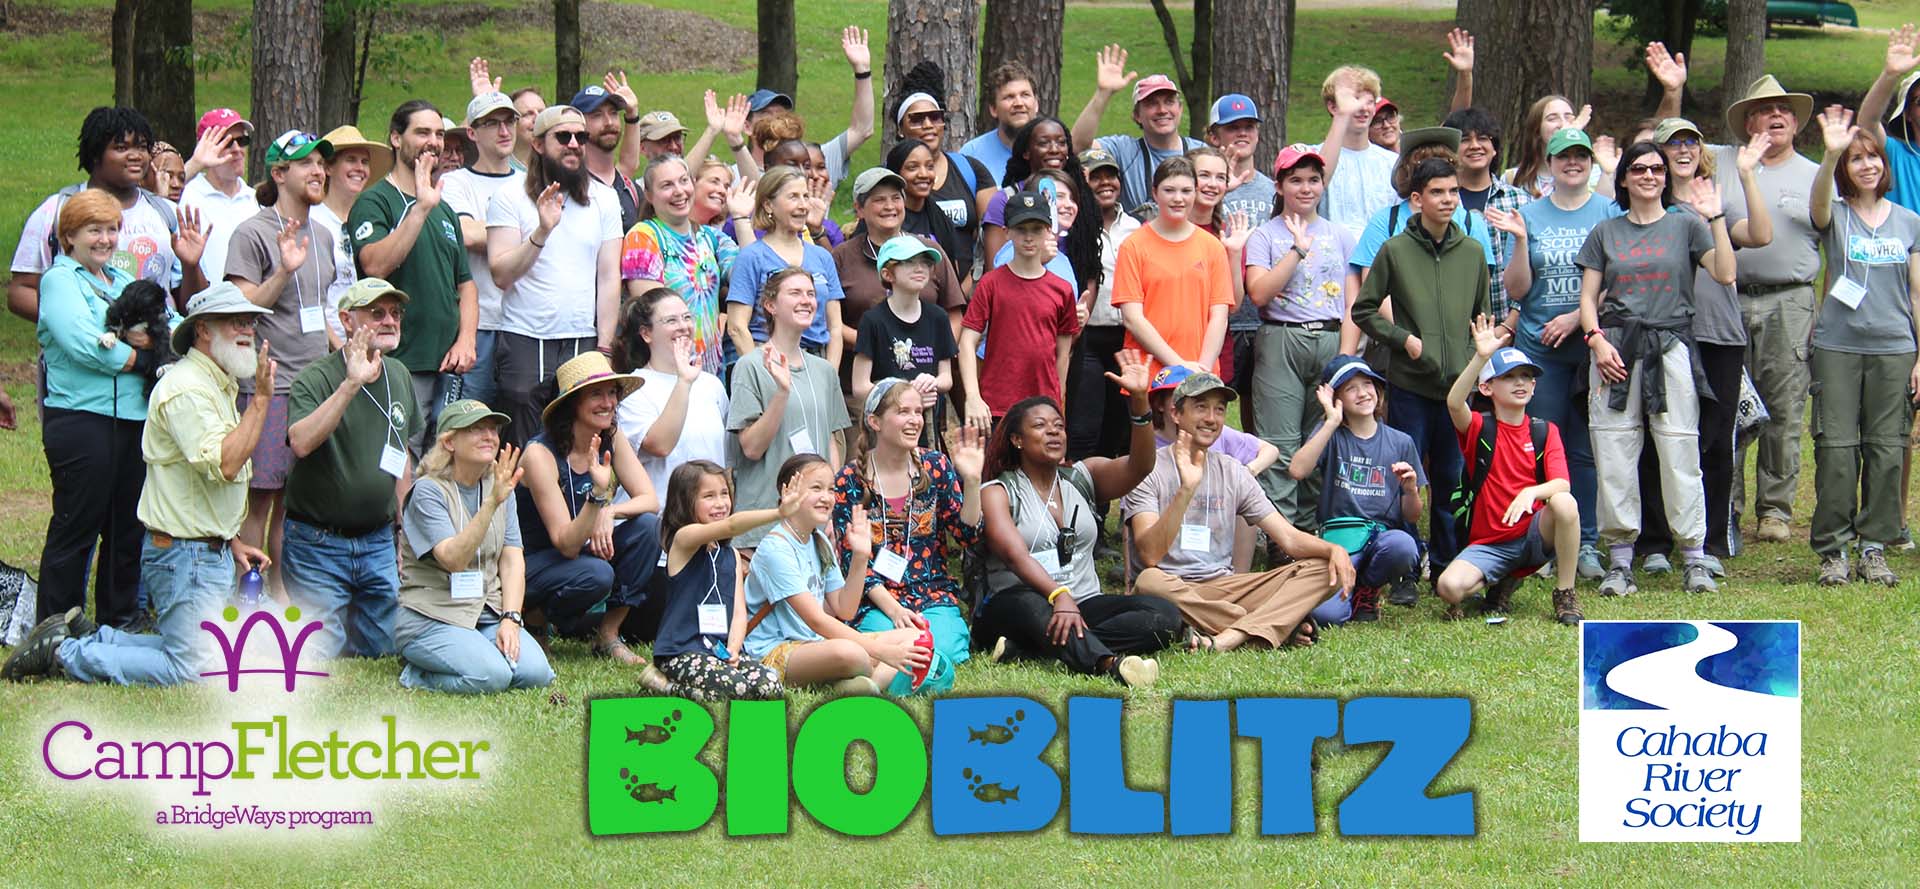 Cahaba River Society BioBlitz uncovers 345 different species at historic Camp Fletcher